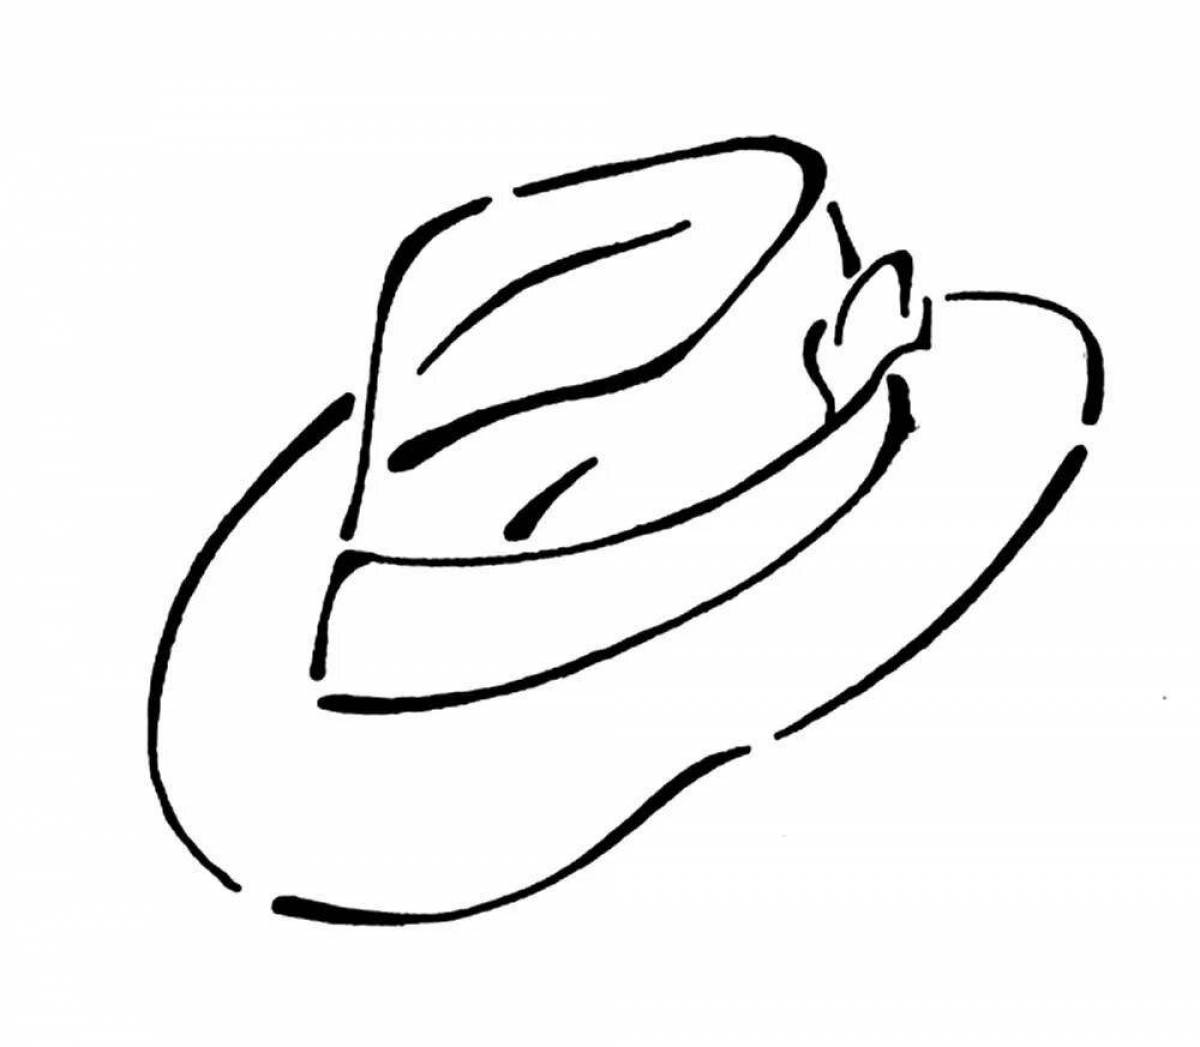 Drawing of a luminous living hat